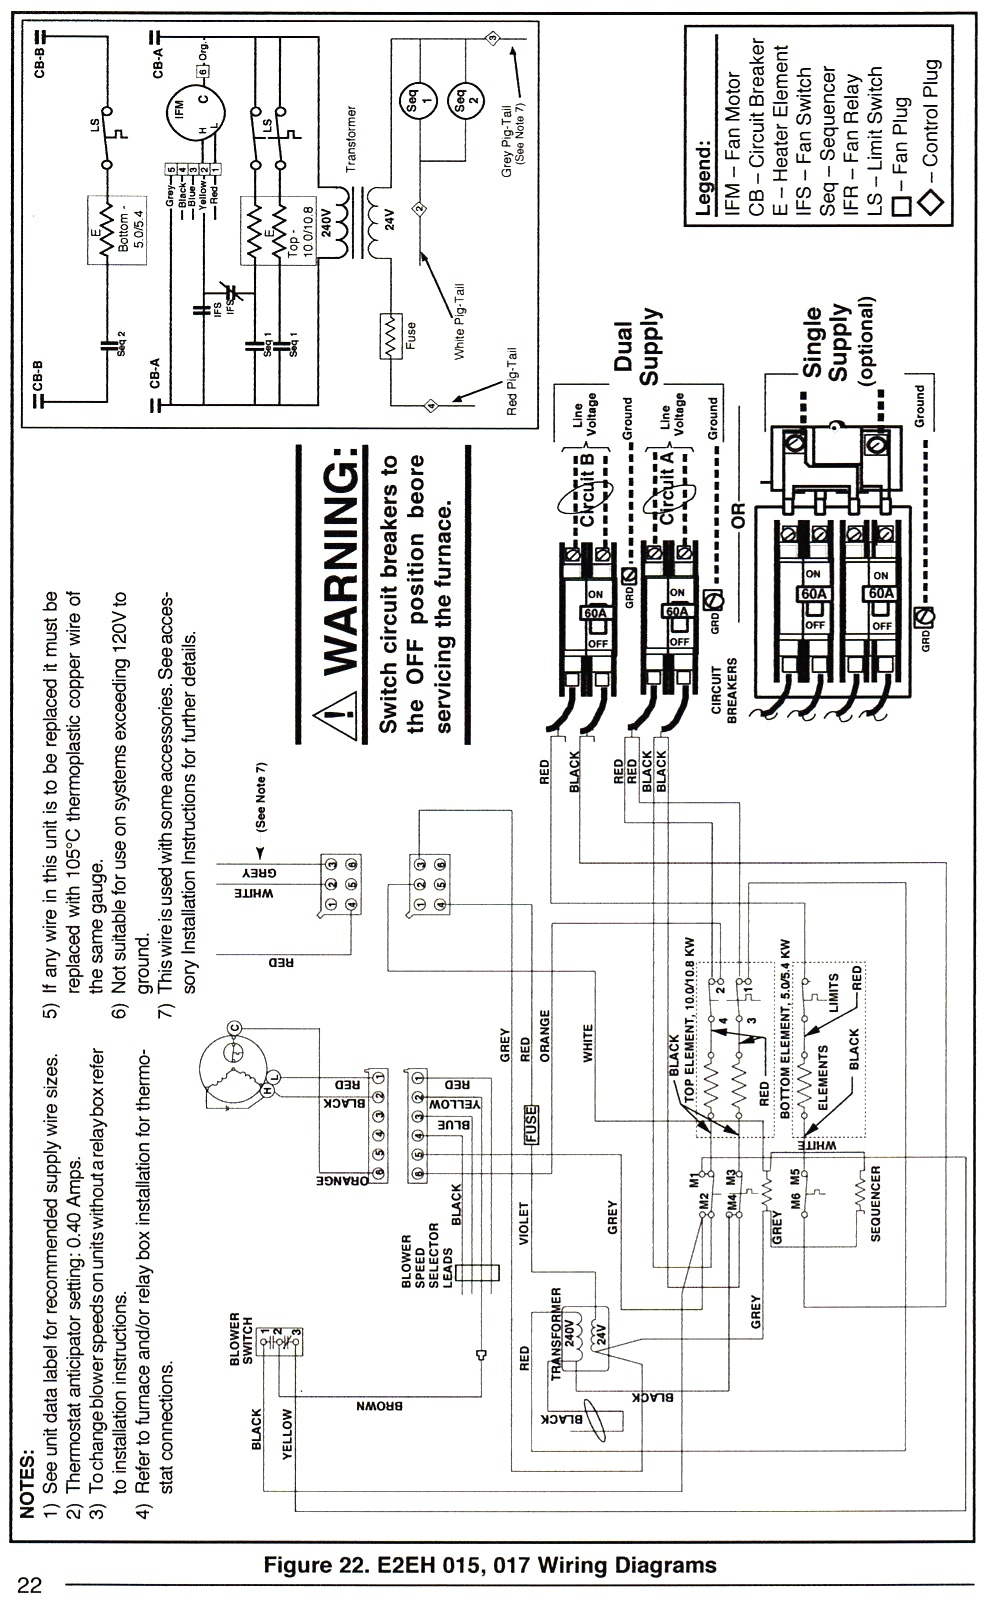 Electrical Wiring Wiring Diagram For Mobile Home Furnace from 2020cadillac.com